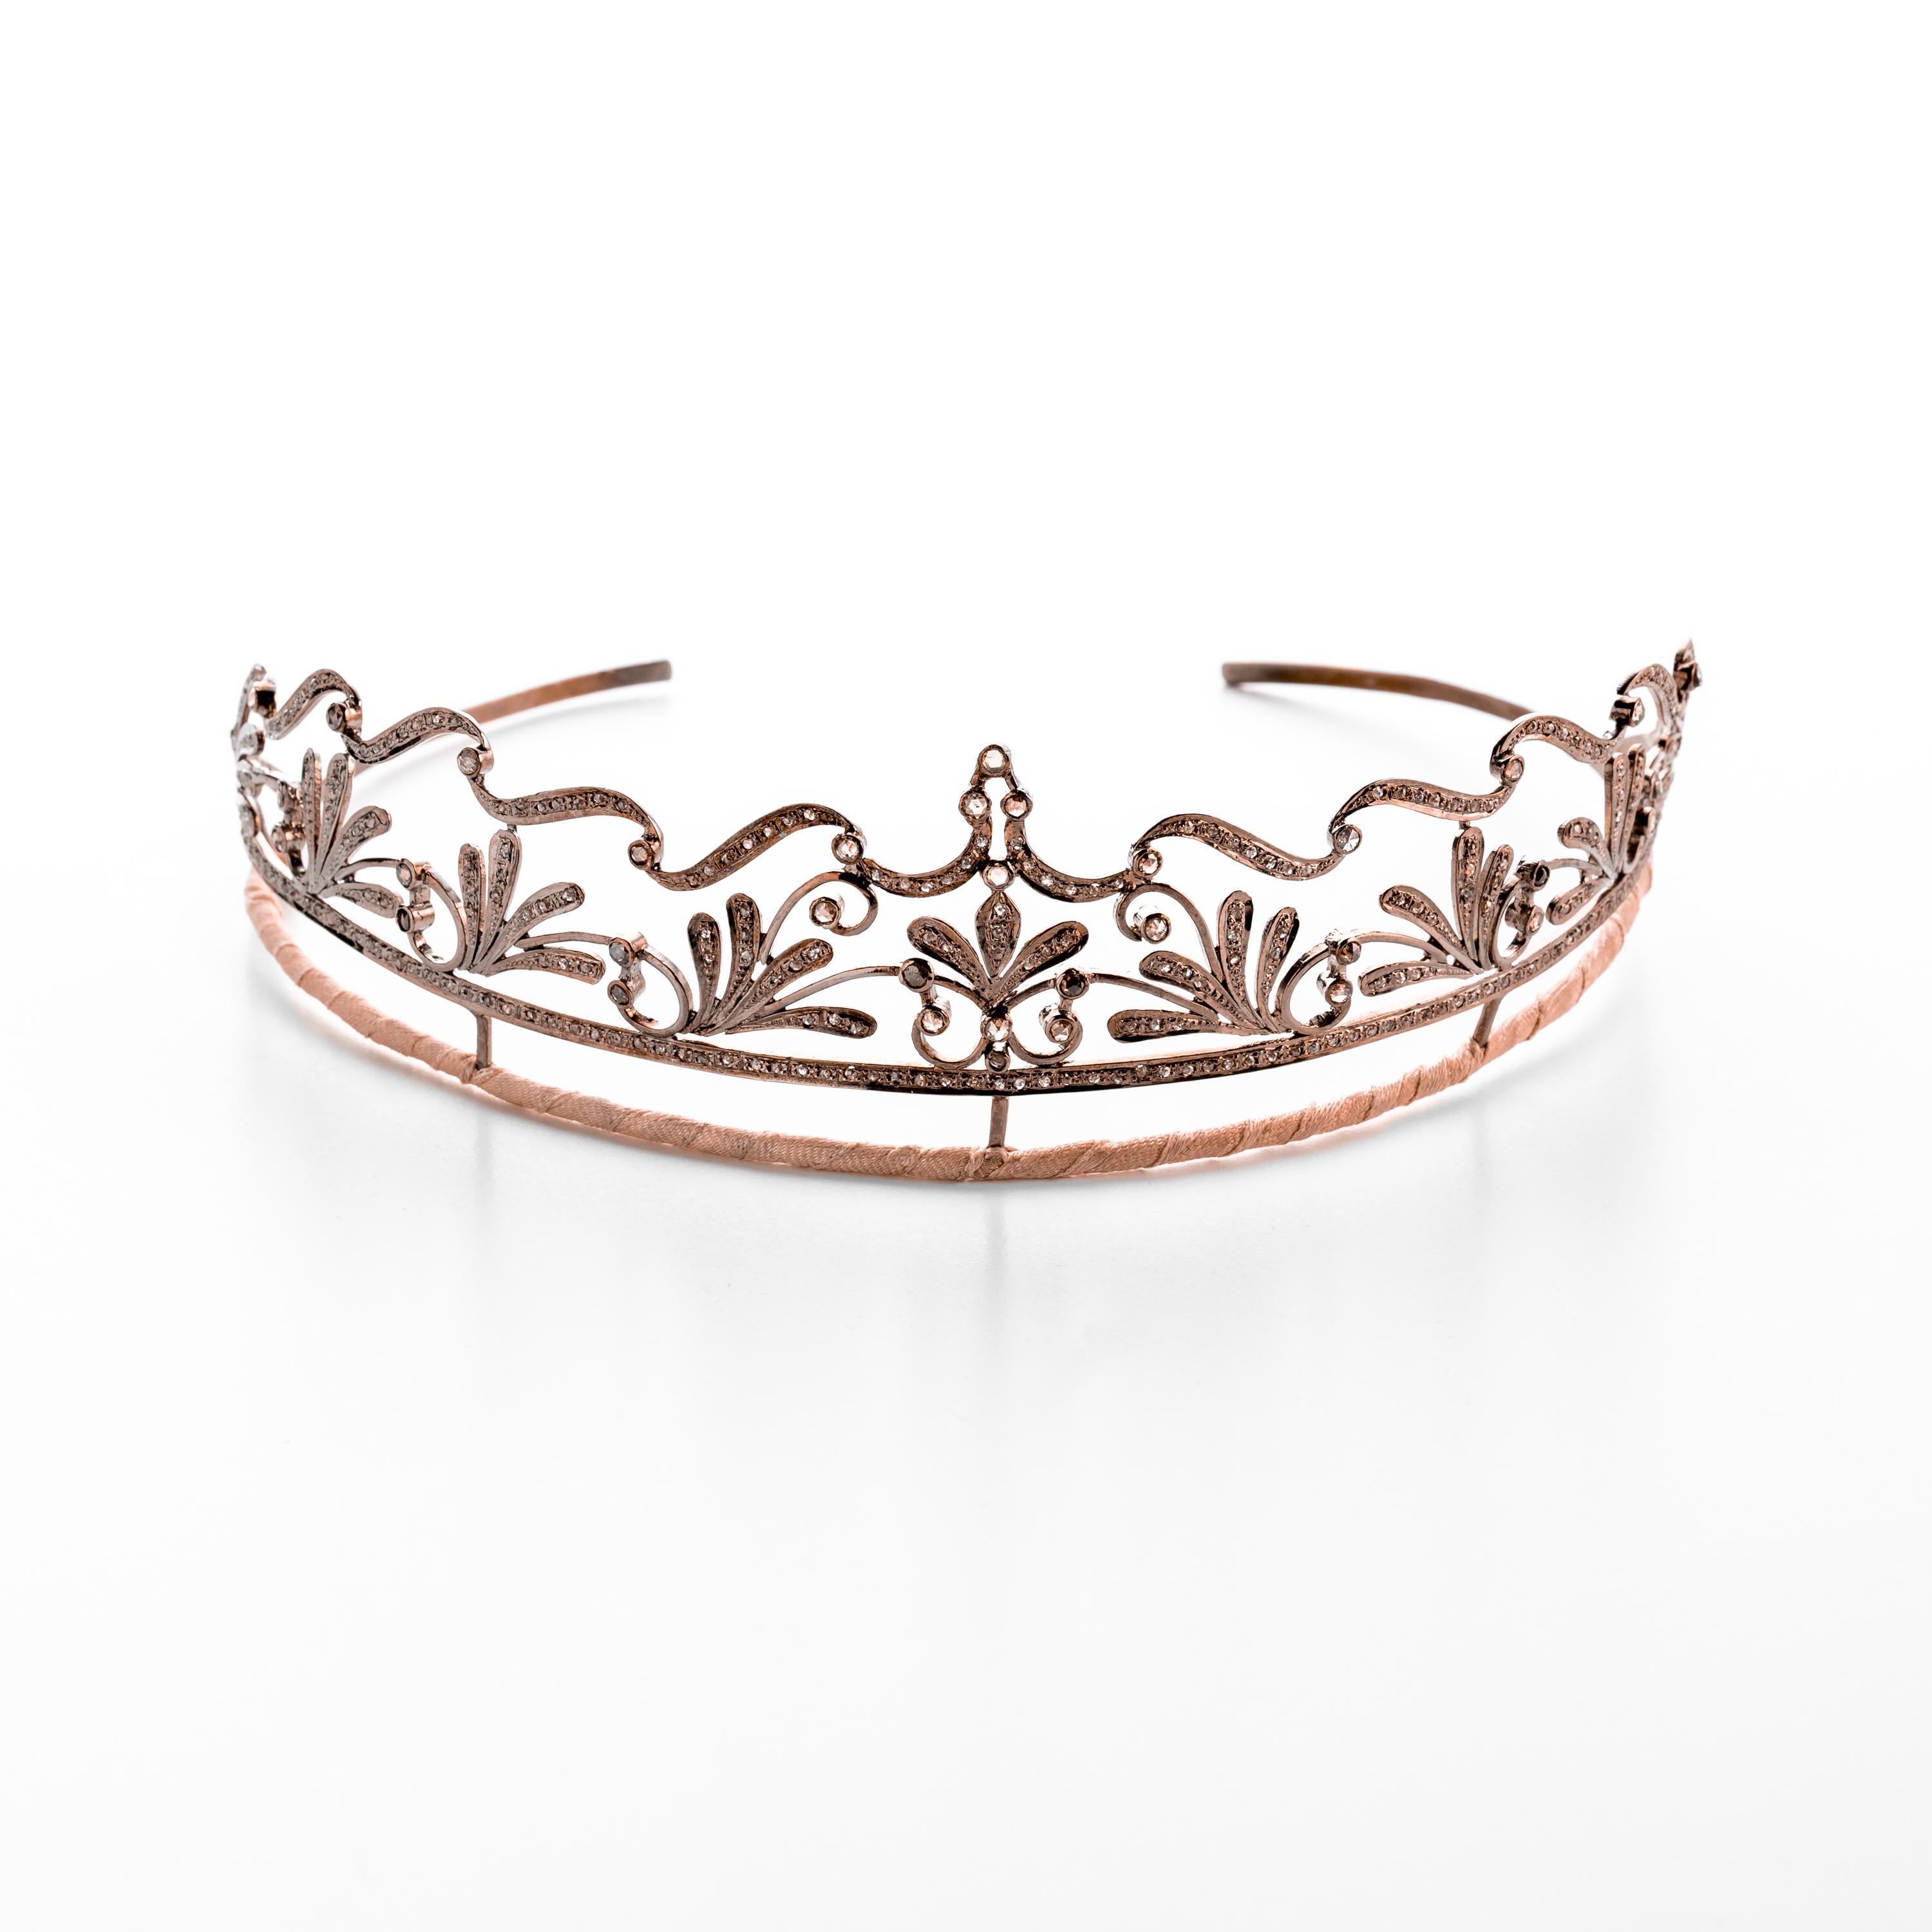 I commissioned this tiara from a jeweler overseas whose work I have long admired. It has been painstakingly crafted from silver and a multitude of glittering rose-cut diamonds that total just over 8 carats. You won't mistake this tiara for a piece